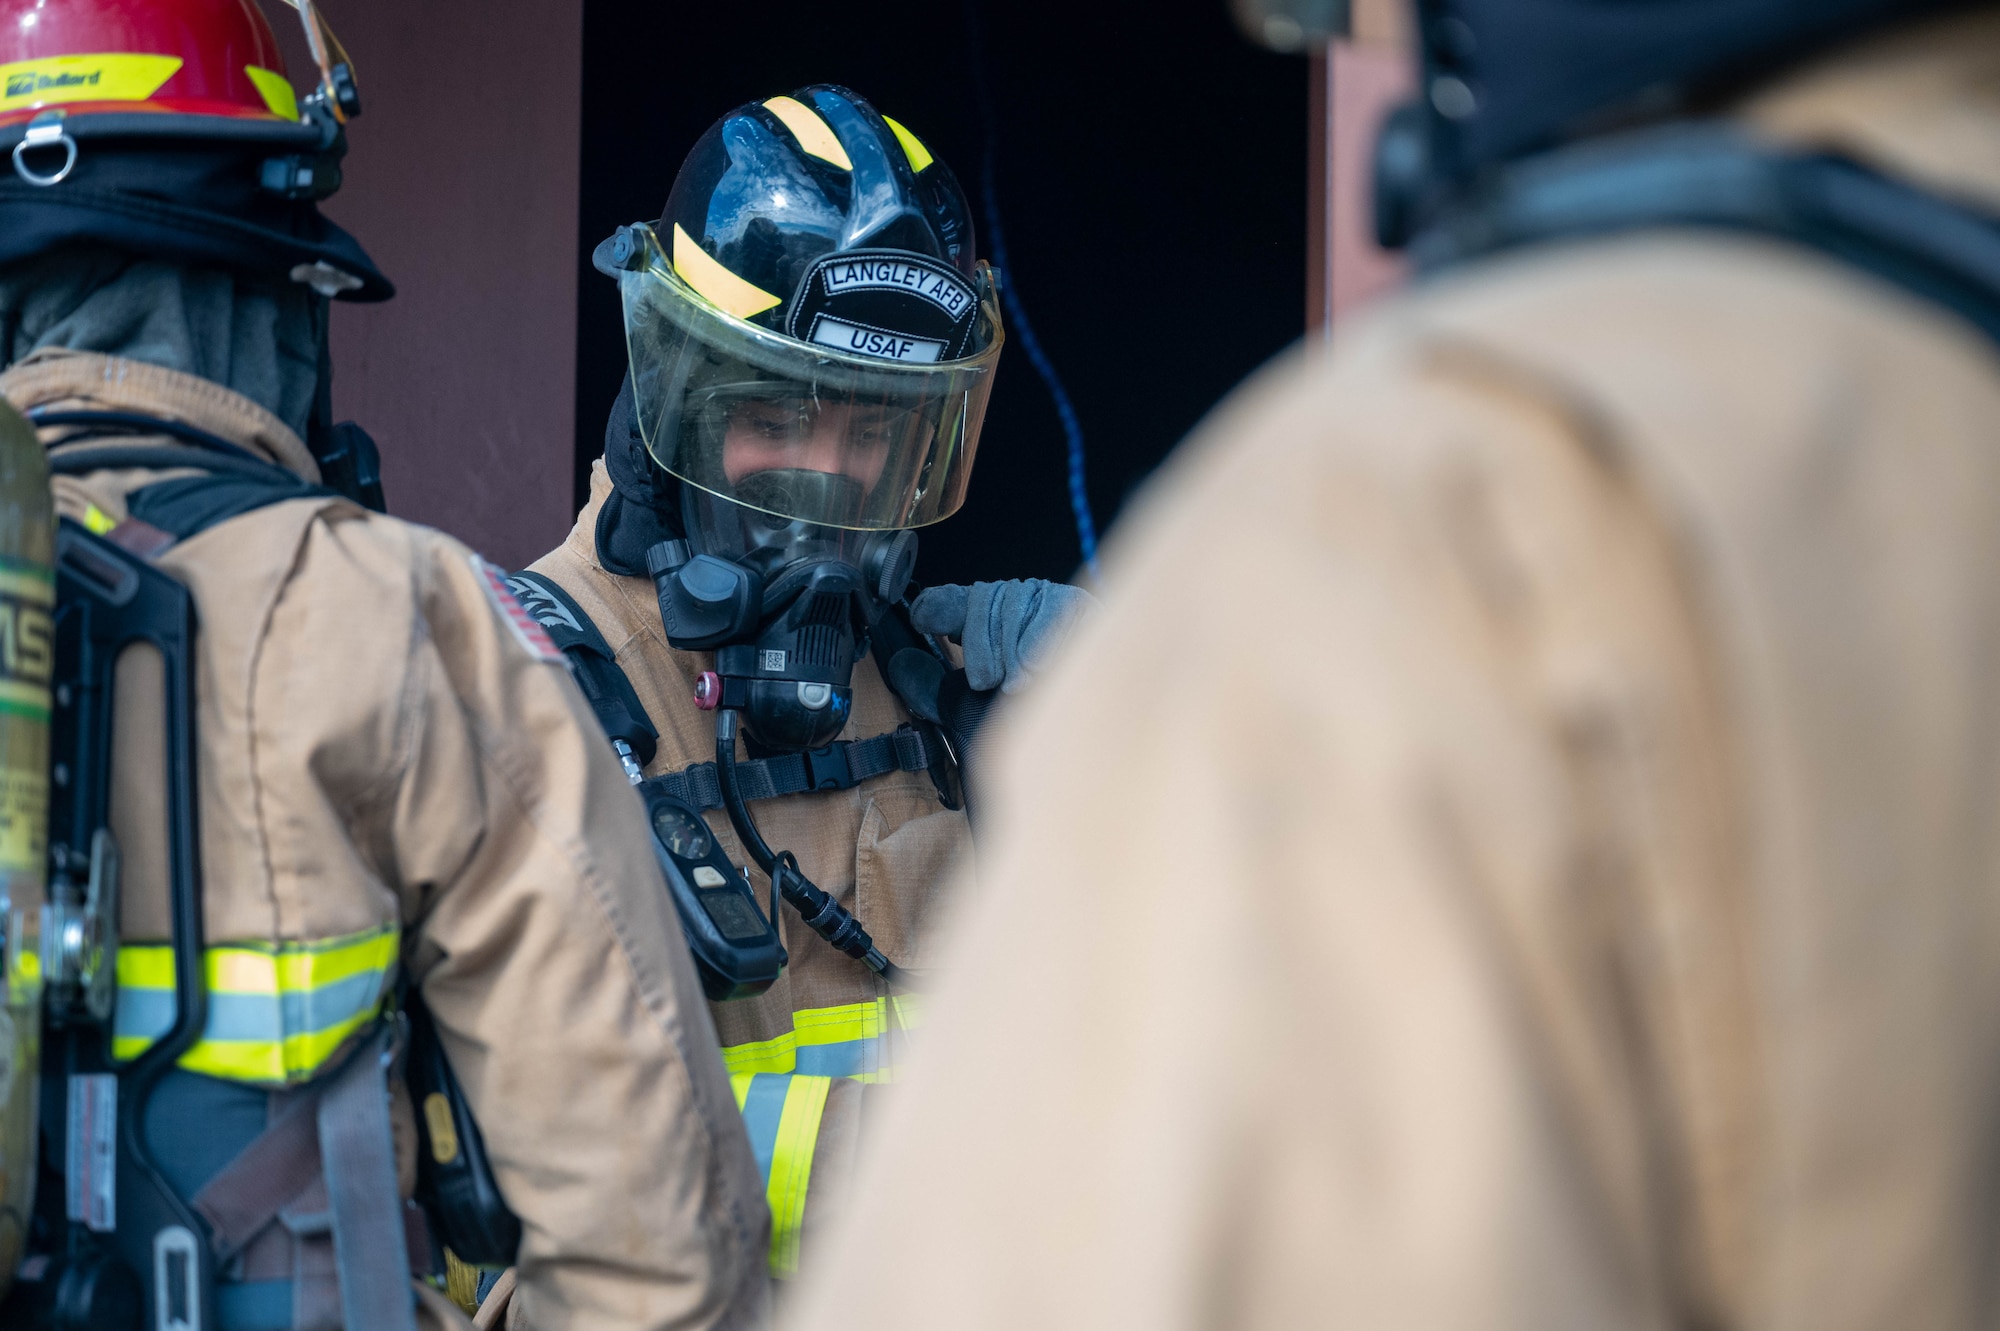 U.S. Air Force Senior Airman Miguel Holloway, 633d Civil Engineer Squadron firefighter, prepares to perform hydraulic ventilation inside the burn building during a rapid intervention team work exercise at Joint Base Langley-Eustis, Virginia, Nov. 17, 2022.